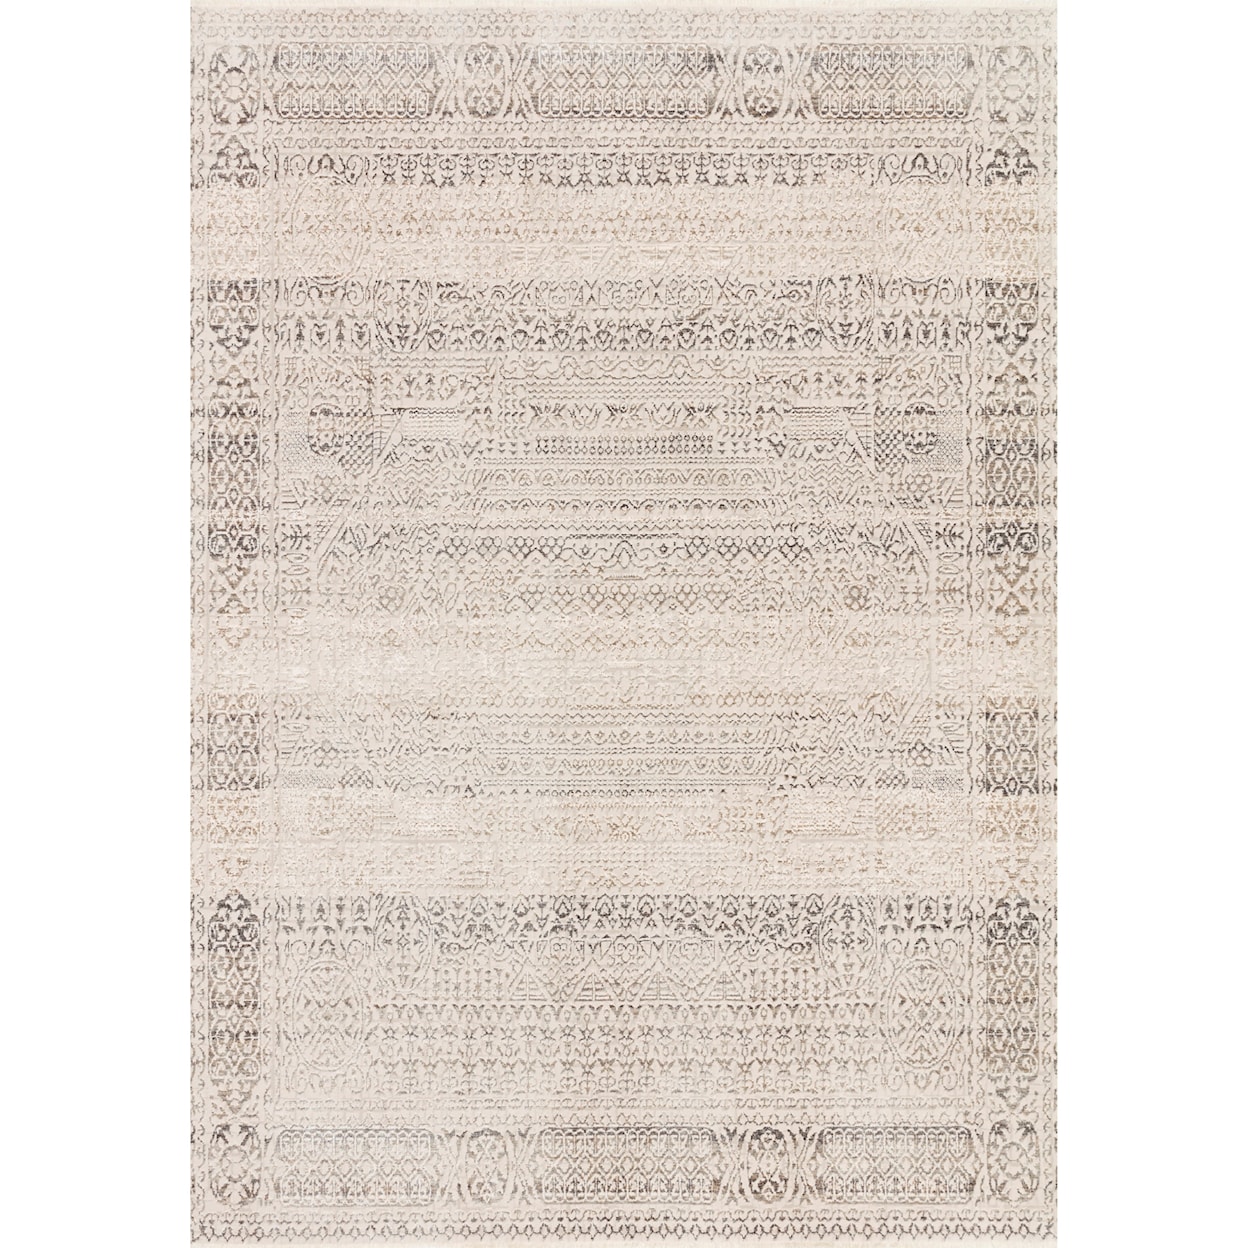 Reeds Rugs Homage 2'6" x 8'0" Ivory / Silver Rug